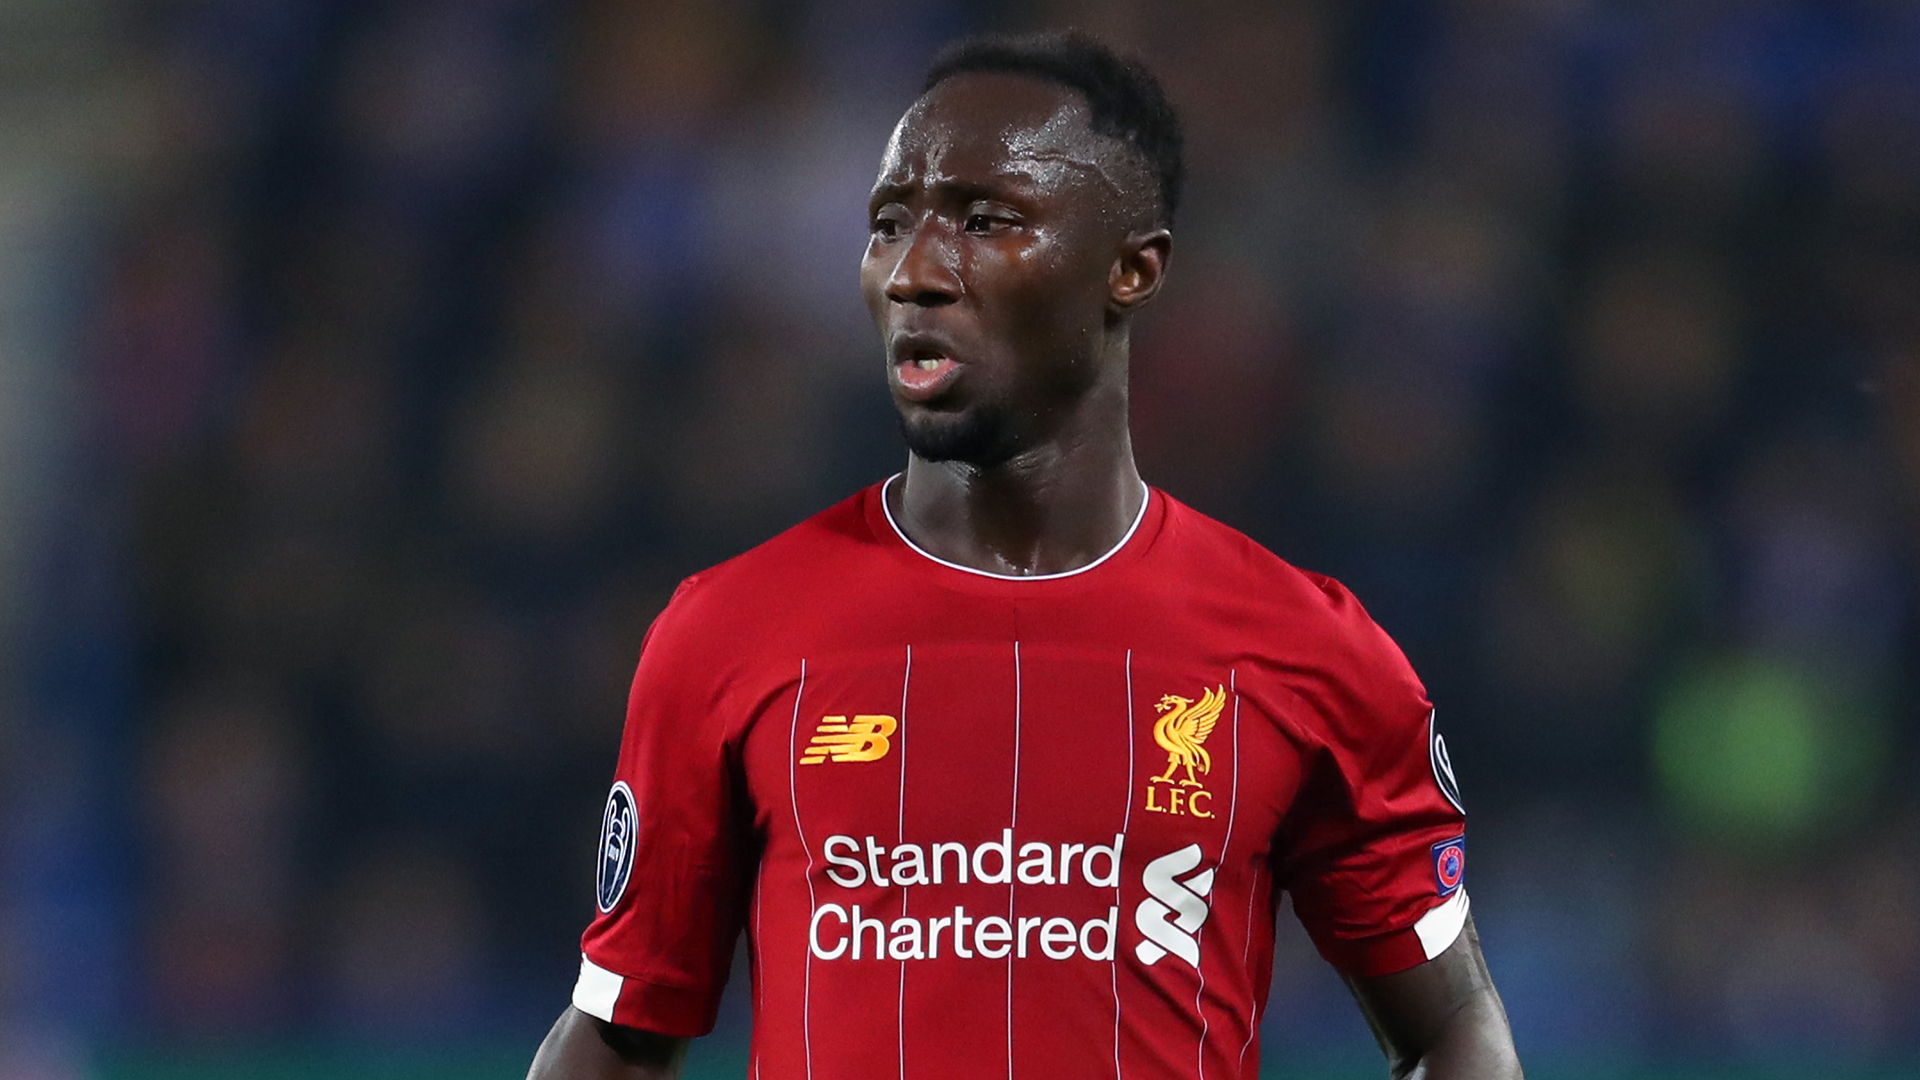 Analysis: Naby Keita class continues to shine through for Liverpool